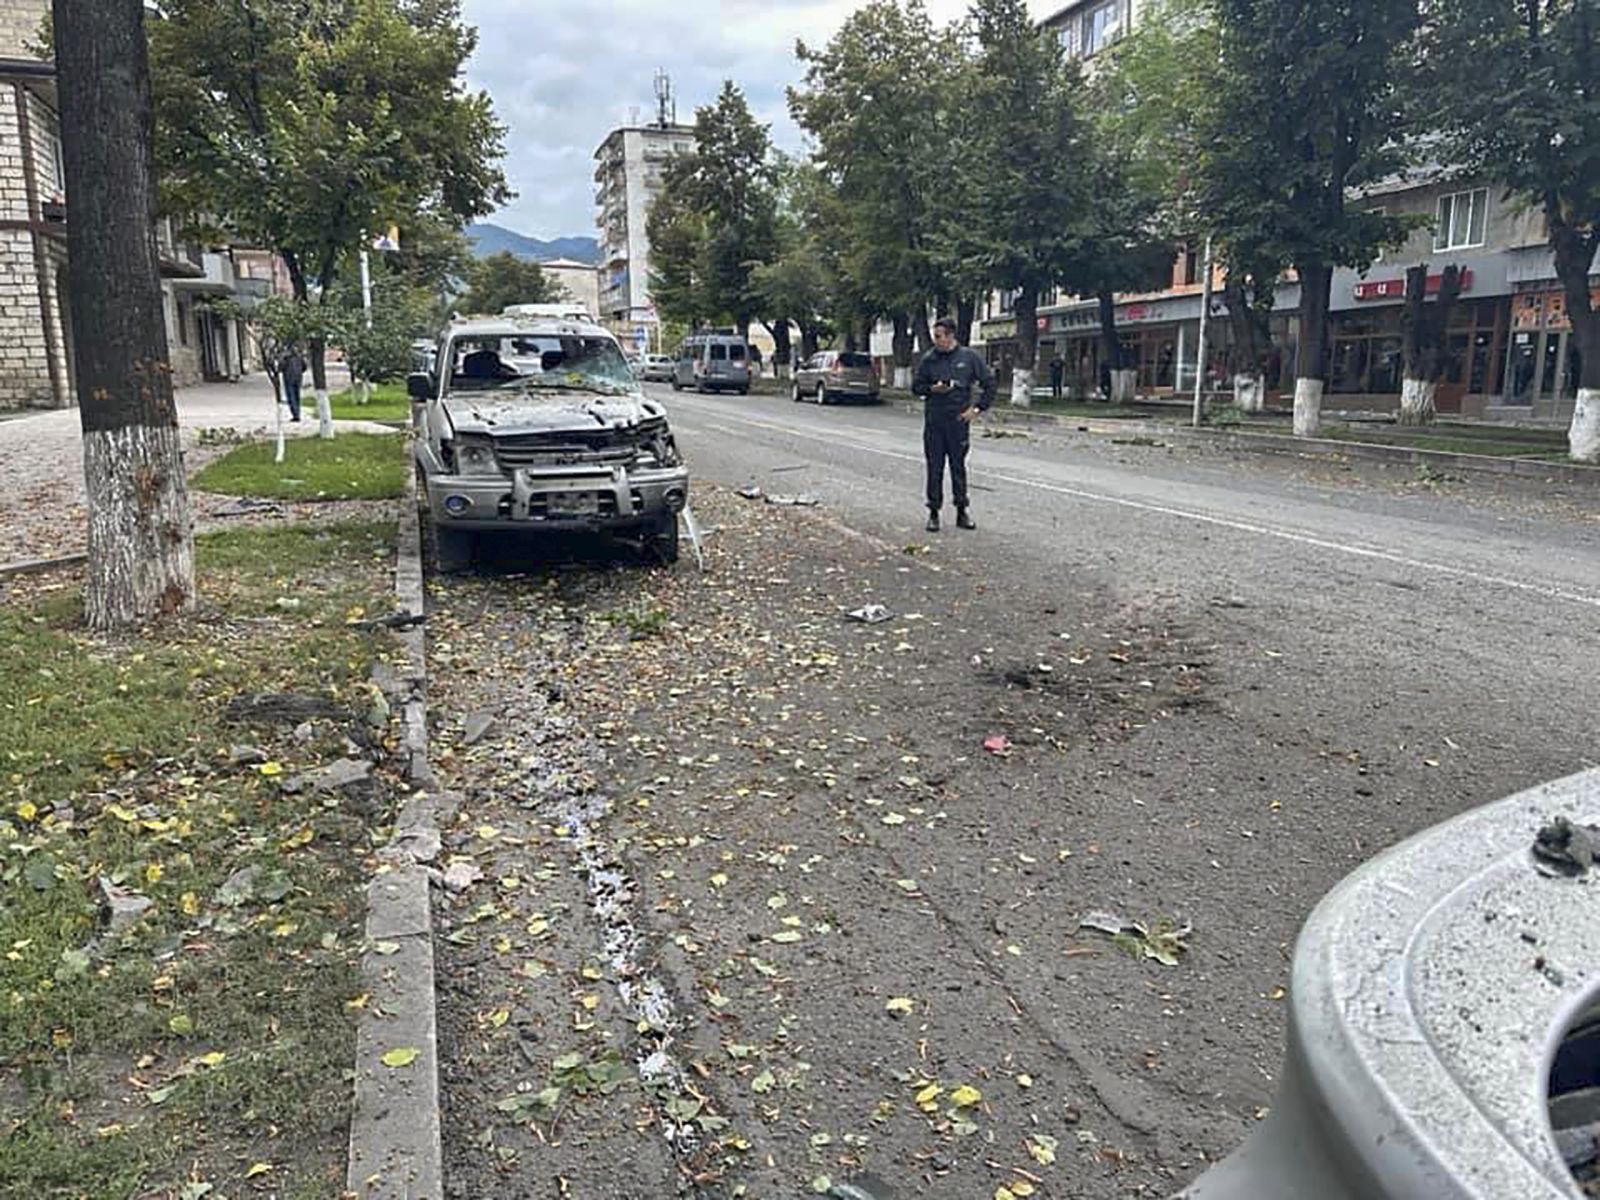 epa10871536 A handout photo made available by Artsakh / Nagorno-Karabakh Human Rights Ombudsman shows a damaged vehicle following the Azeri military operation in Stepanakert, Nagorno-Karabakh, 20 September 2023. More than two thousand civilians, including 1,049 children, were evacuated from the 'most dangerous areas' of Nagorno-Karabakh, the Russian ministry said. Azerbaijan's Ministry of Defense announced on 20 September that it agreed to a proposal for a ceasefire with ethnic Armenians in Azerbaijan's breakaway region of Nagorno-Karabakh, a day after Azerbaijan began an offensive to take control of the enclave.  EPA/ARTSAKH / NAGORNO-KARABAKH HUMAN RIGHTS OMBUDSMAN/HANDOUT -- MANDATORY CREDIT -- BEST QUALITY AVAILABLE --   HANDOUT EDITORIAL USE ONLY/NO SALES HANDOUT EDITORIAL USE ONLY/NO SALES